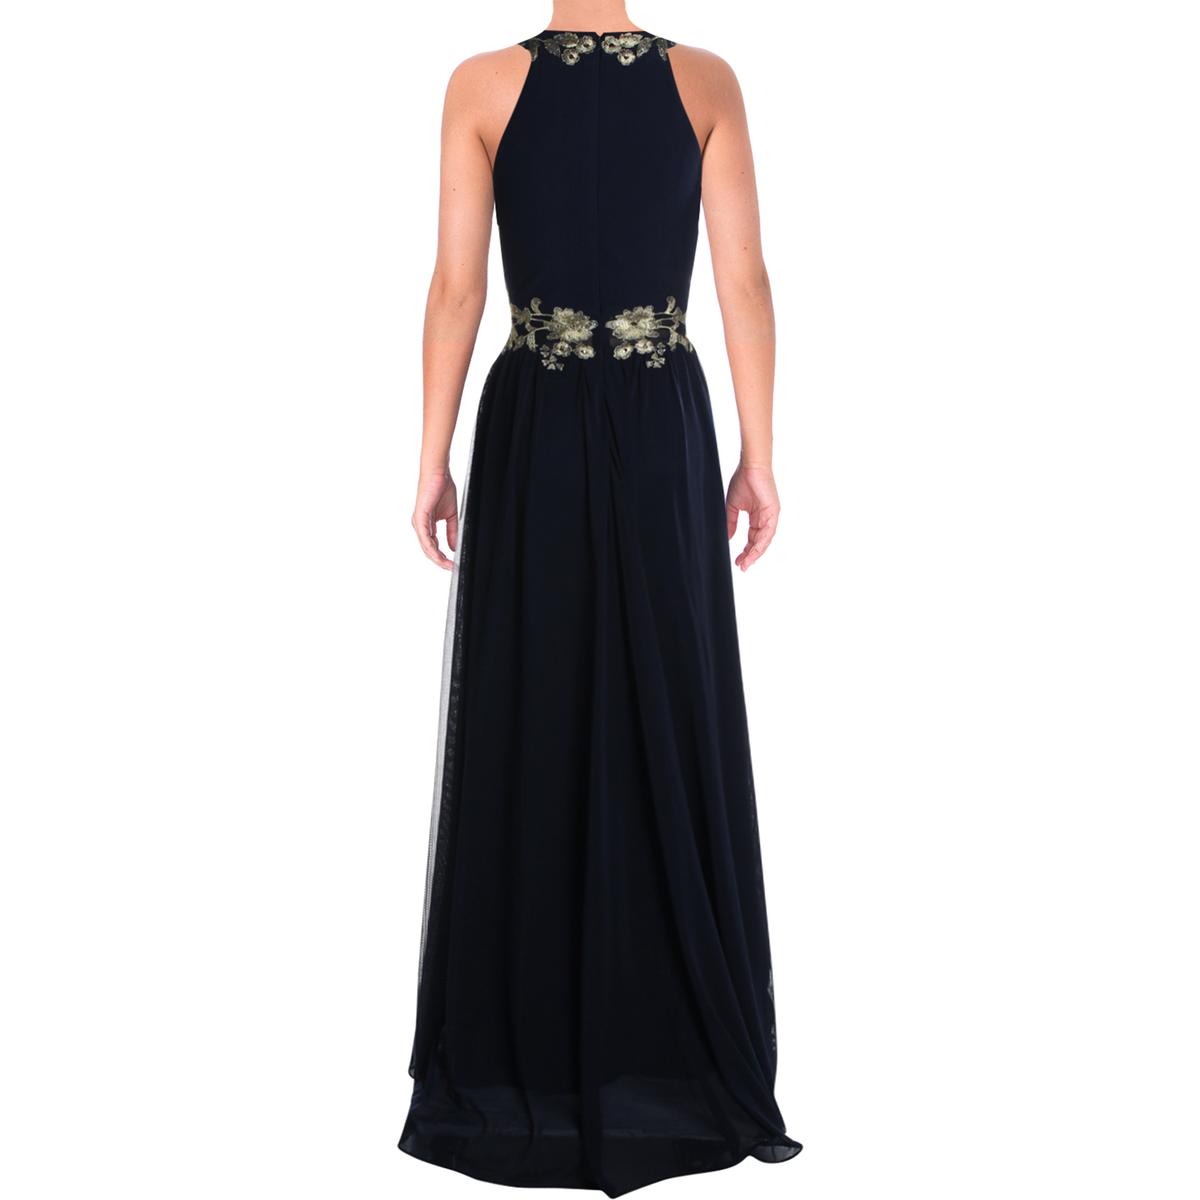 Betsy & Adam Womens Navy Embroidered Halter Formal Dress Gown 16 BHFO